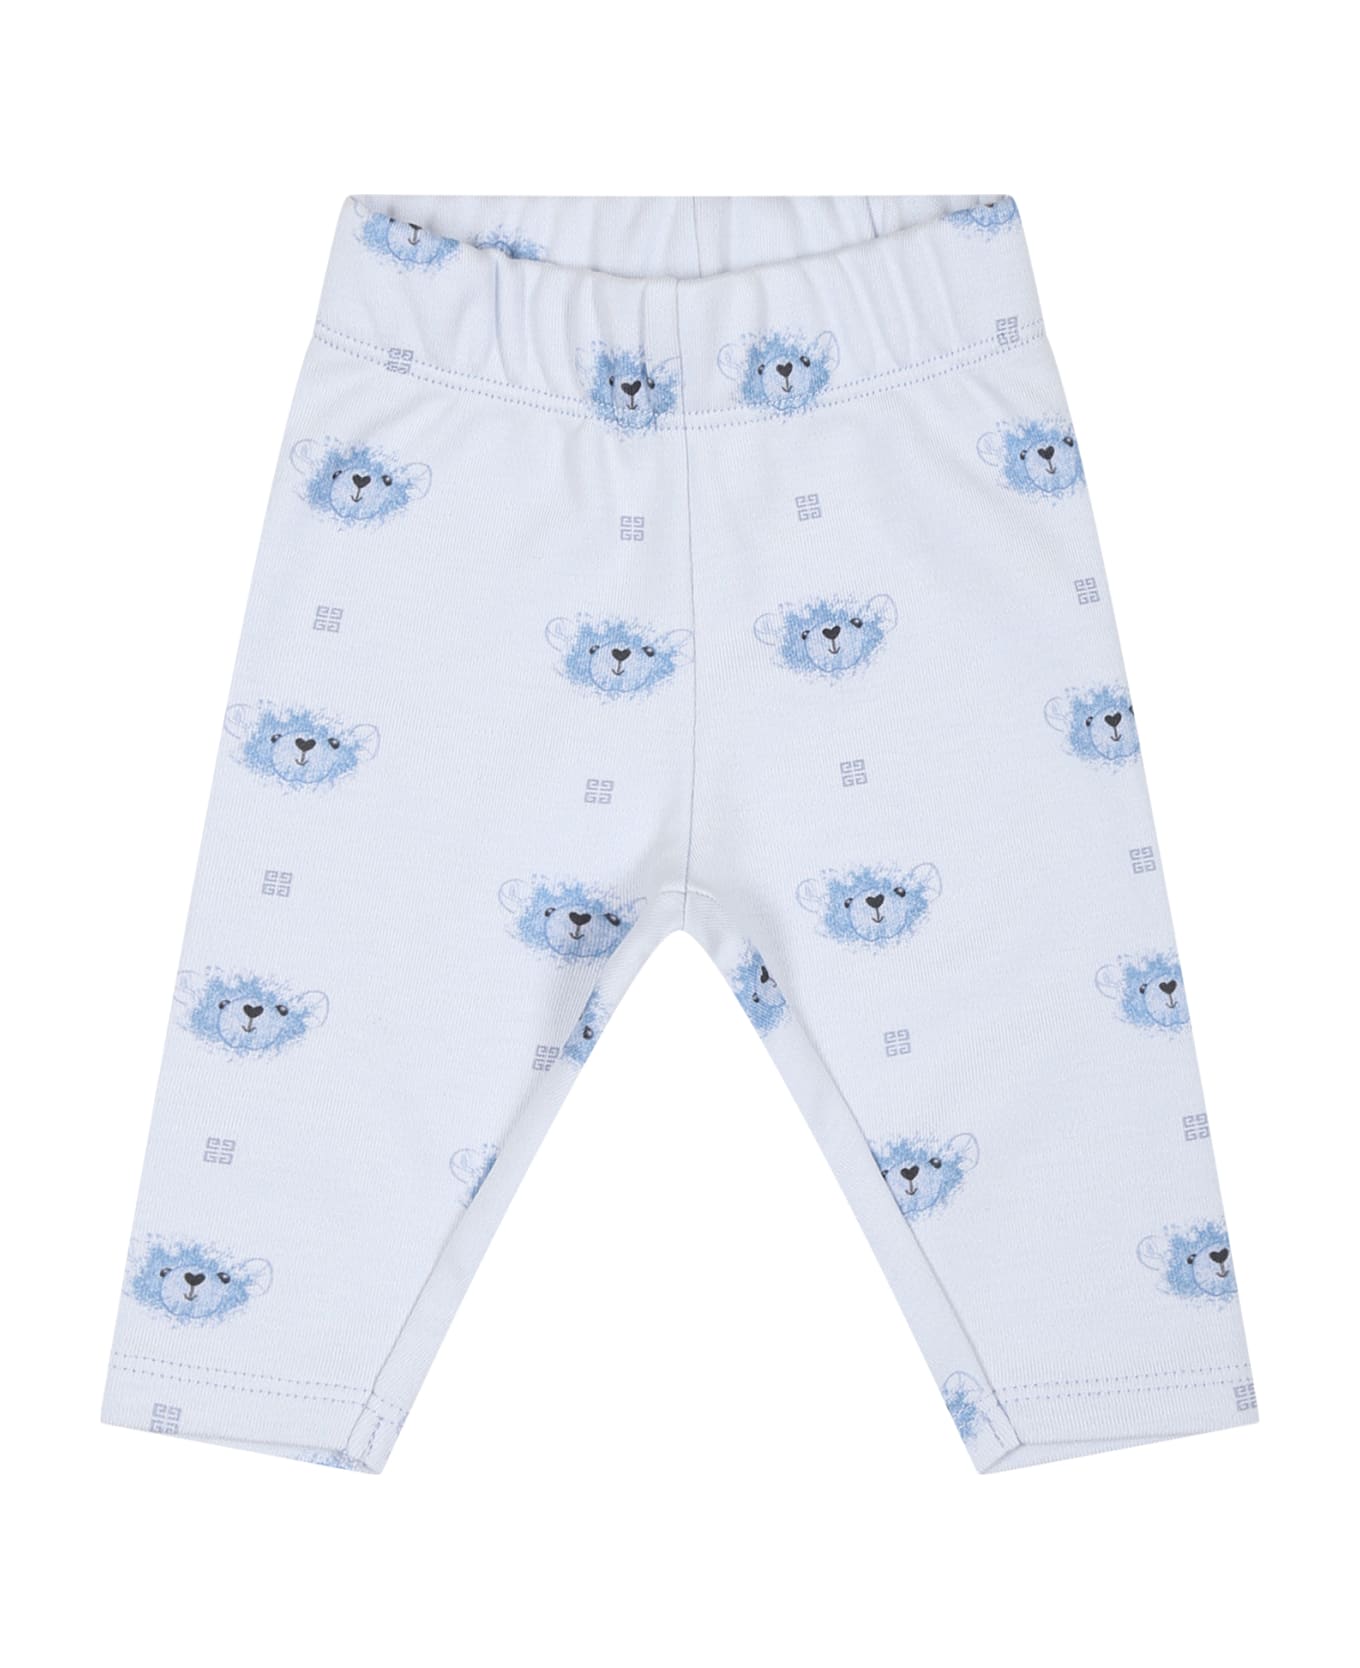 Givenchy Light Blue Suit For Baby Boy With Logo - Light Blue